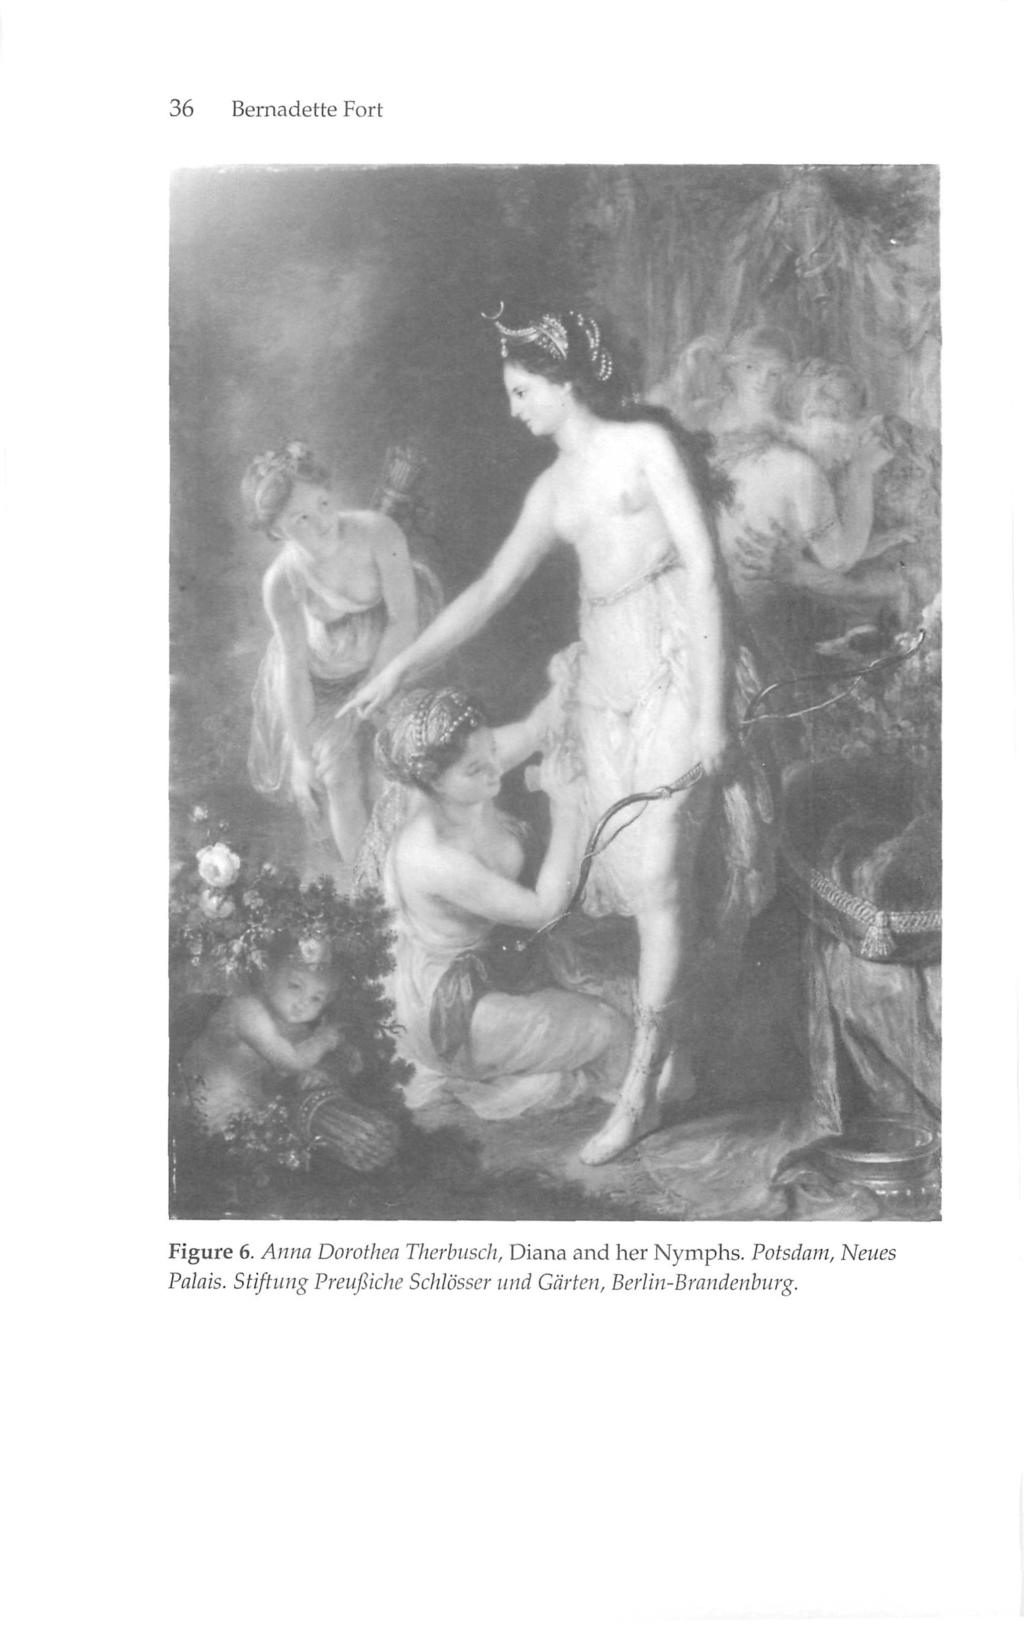 Figure 6. Anna Dorothea Therbusch, Diana and her Nymphs.